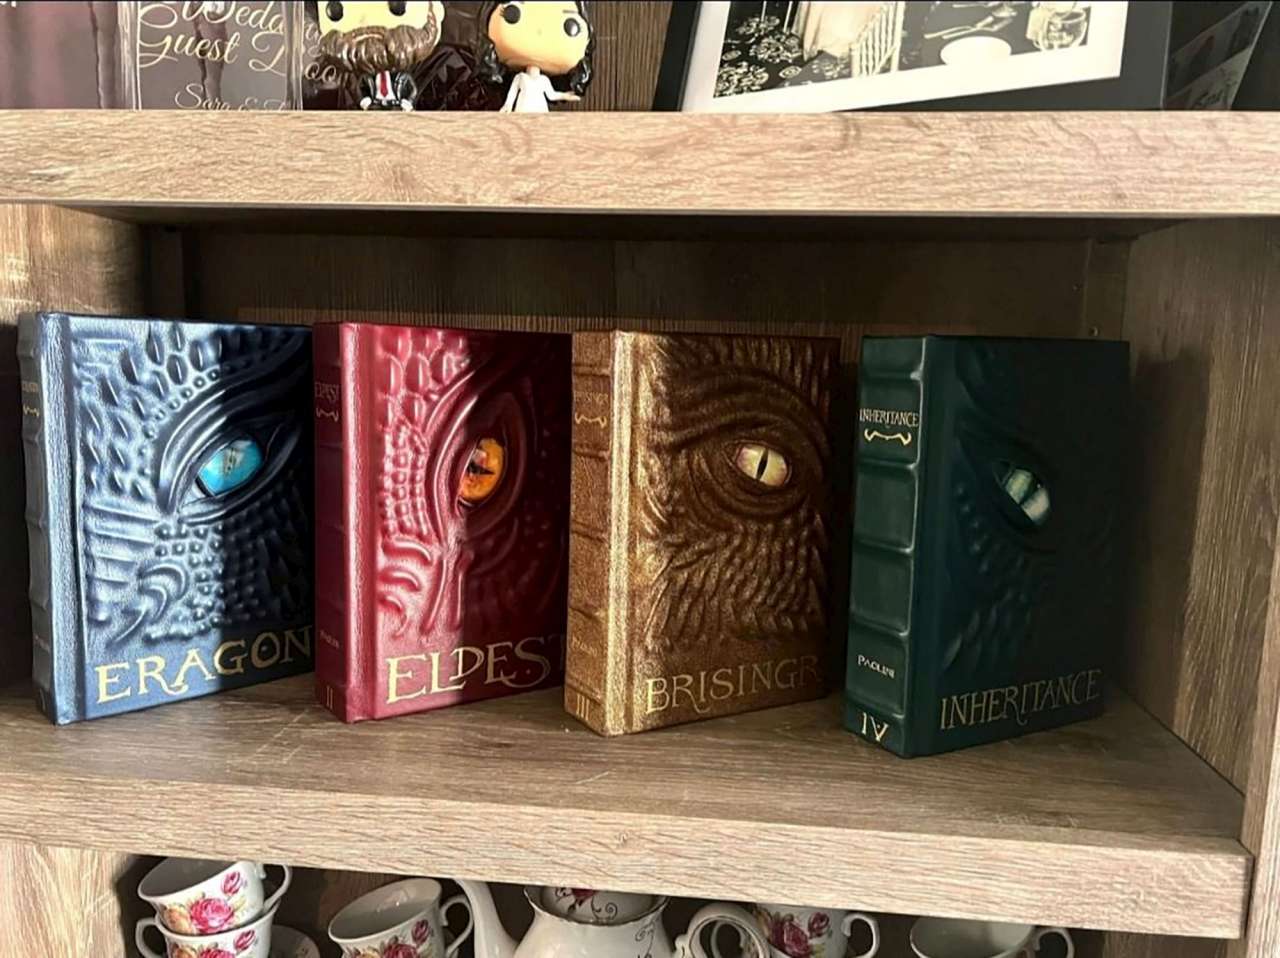 Inheritance　Series　Geekify　Paolini)　Inc　Books　Leatherbound　Rebound　Book　Cycle　(Christopher